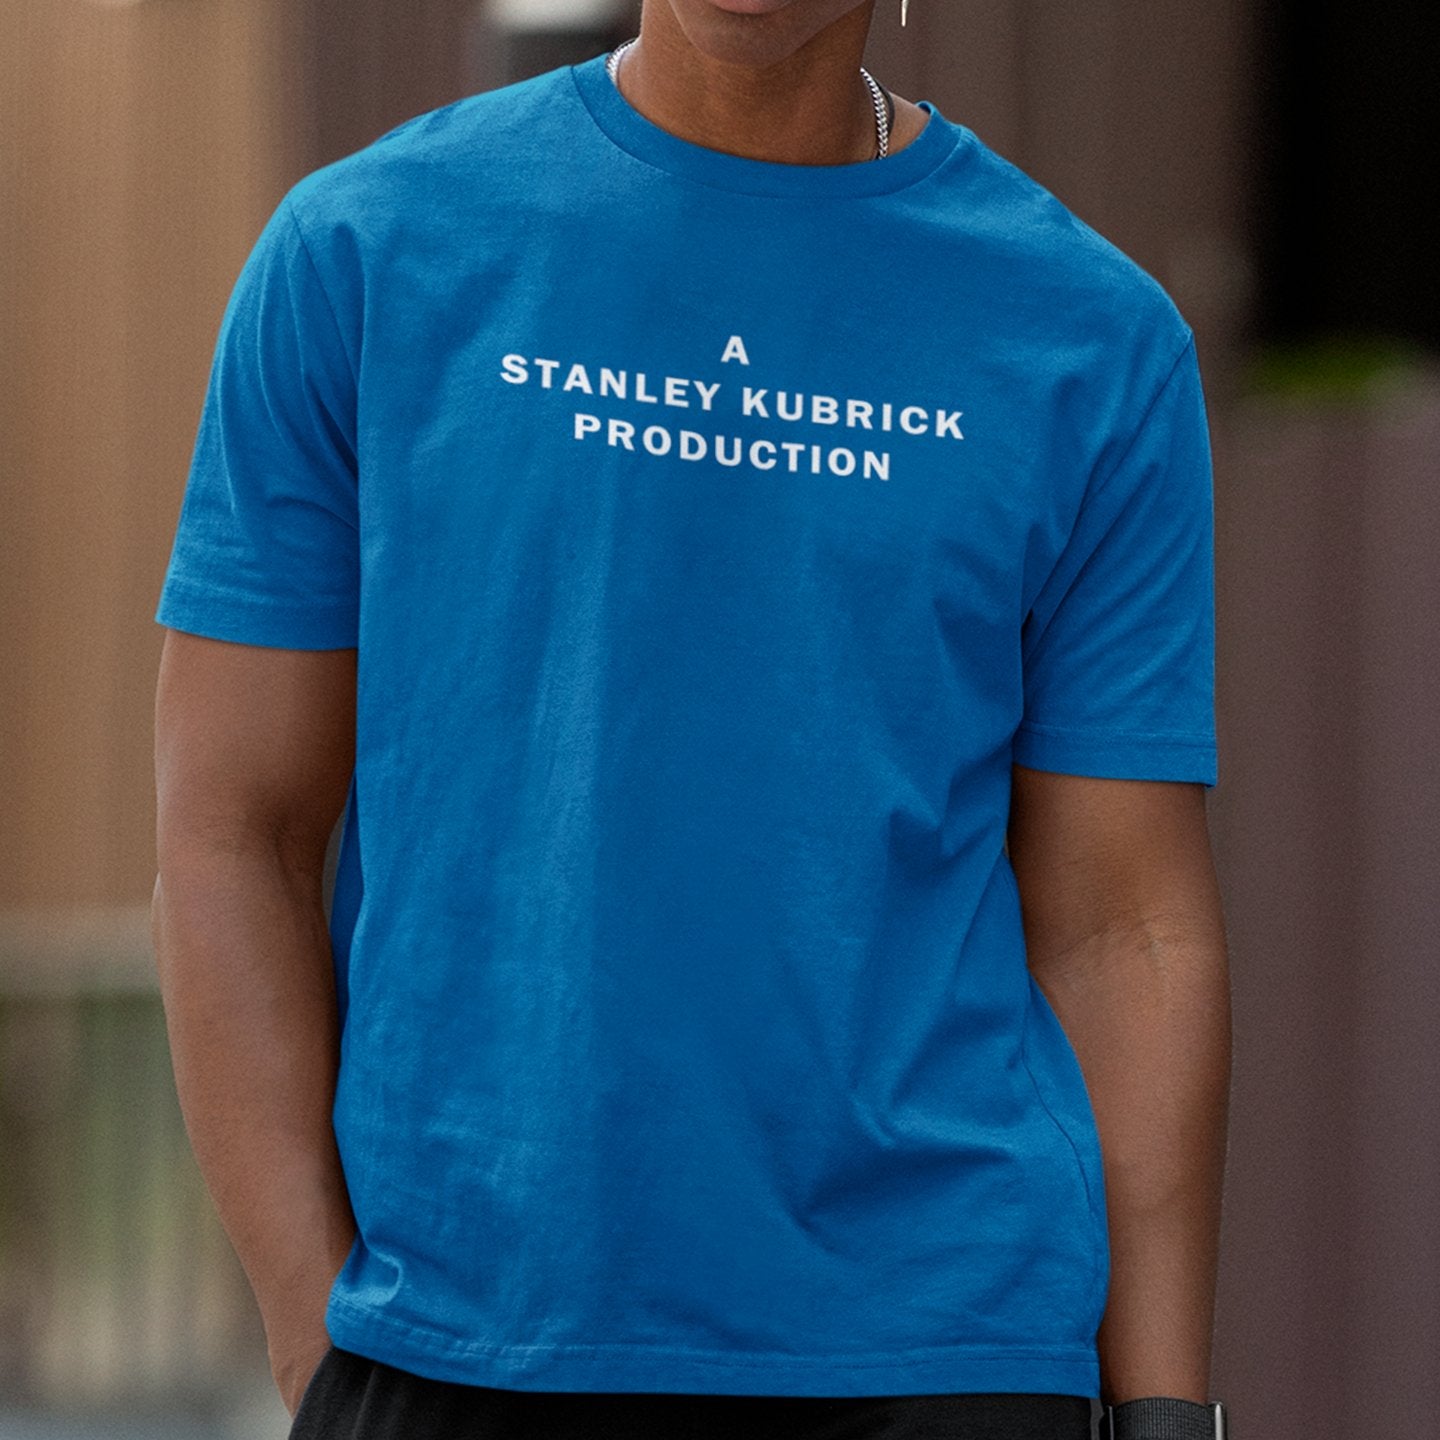 A Stanley Kubrick Production - T-Shirt